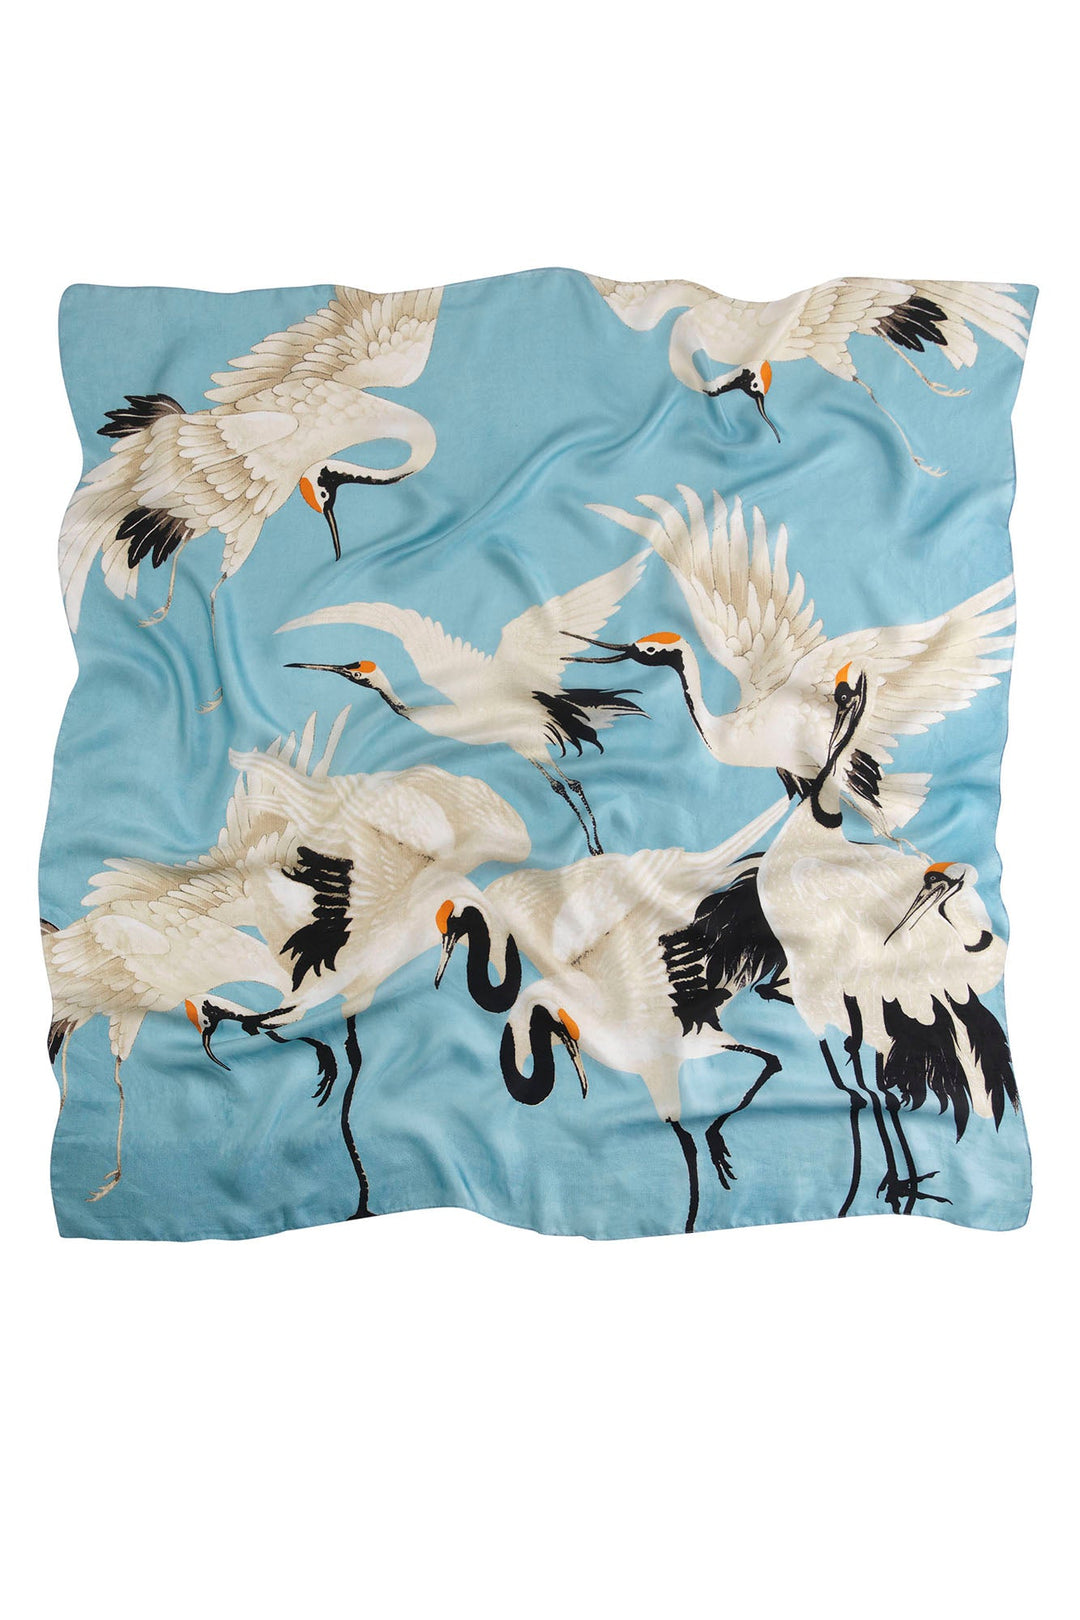 One Hundred Stars Stork Crane Sky Blue Silk Square Scarf - 100% silk, 100% hand screen printed and a whole 100cm x 100cm of print, this silk scarf oozes luxury whether you wear it knotted around your neck, as a headscarf or fastened around the handle of your favourite handbag.